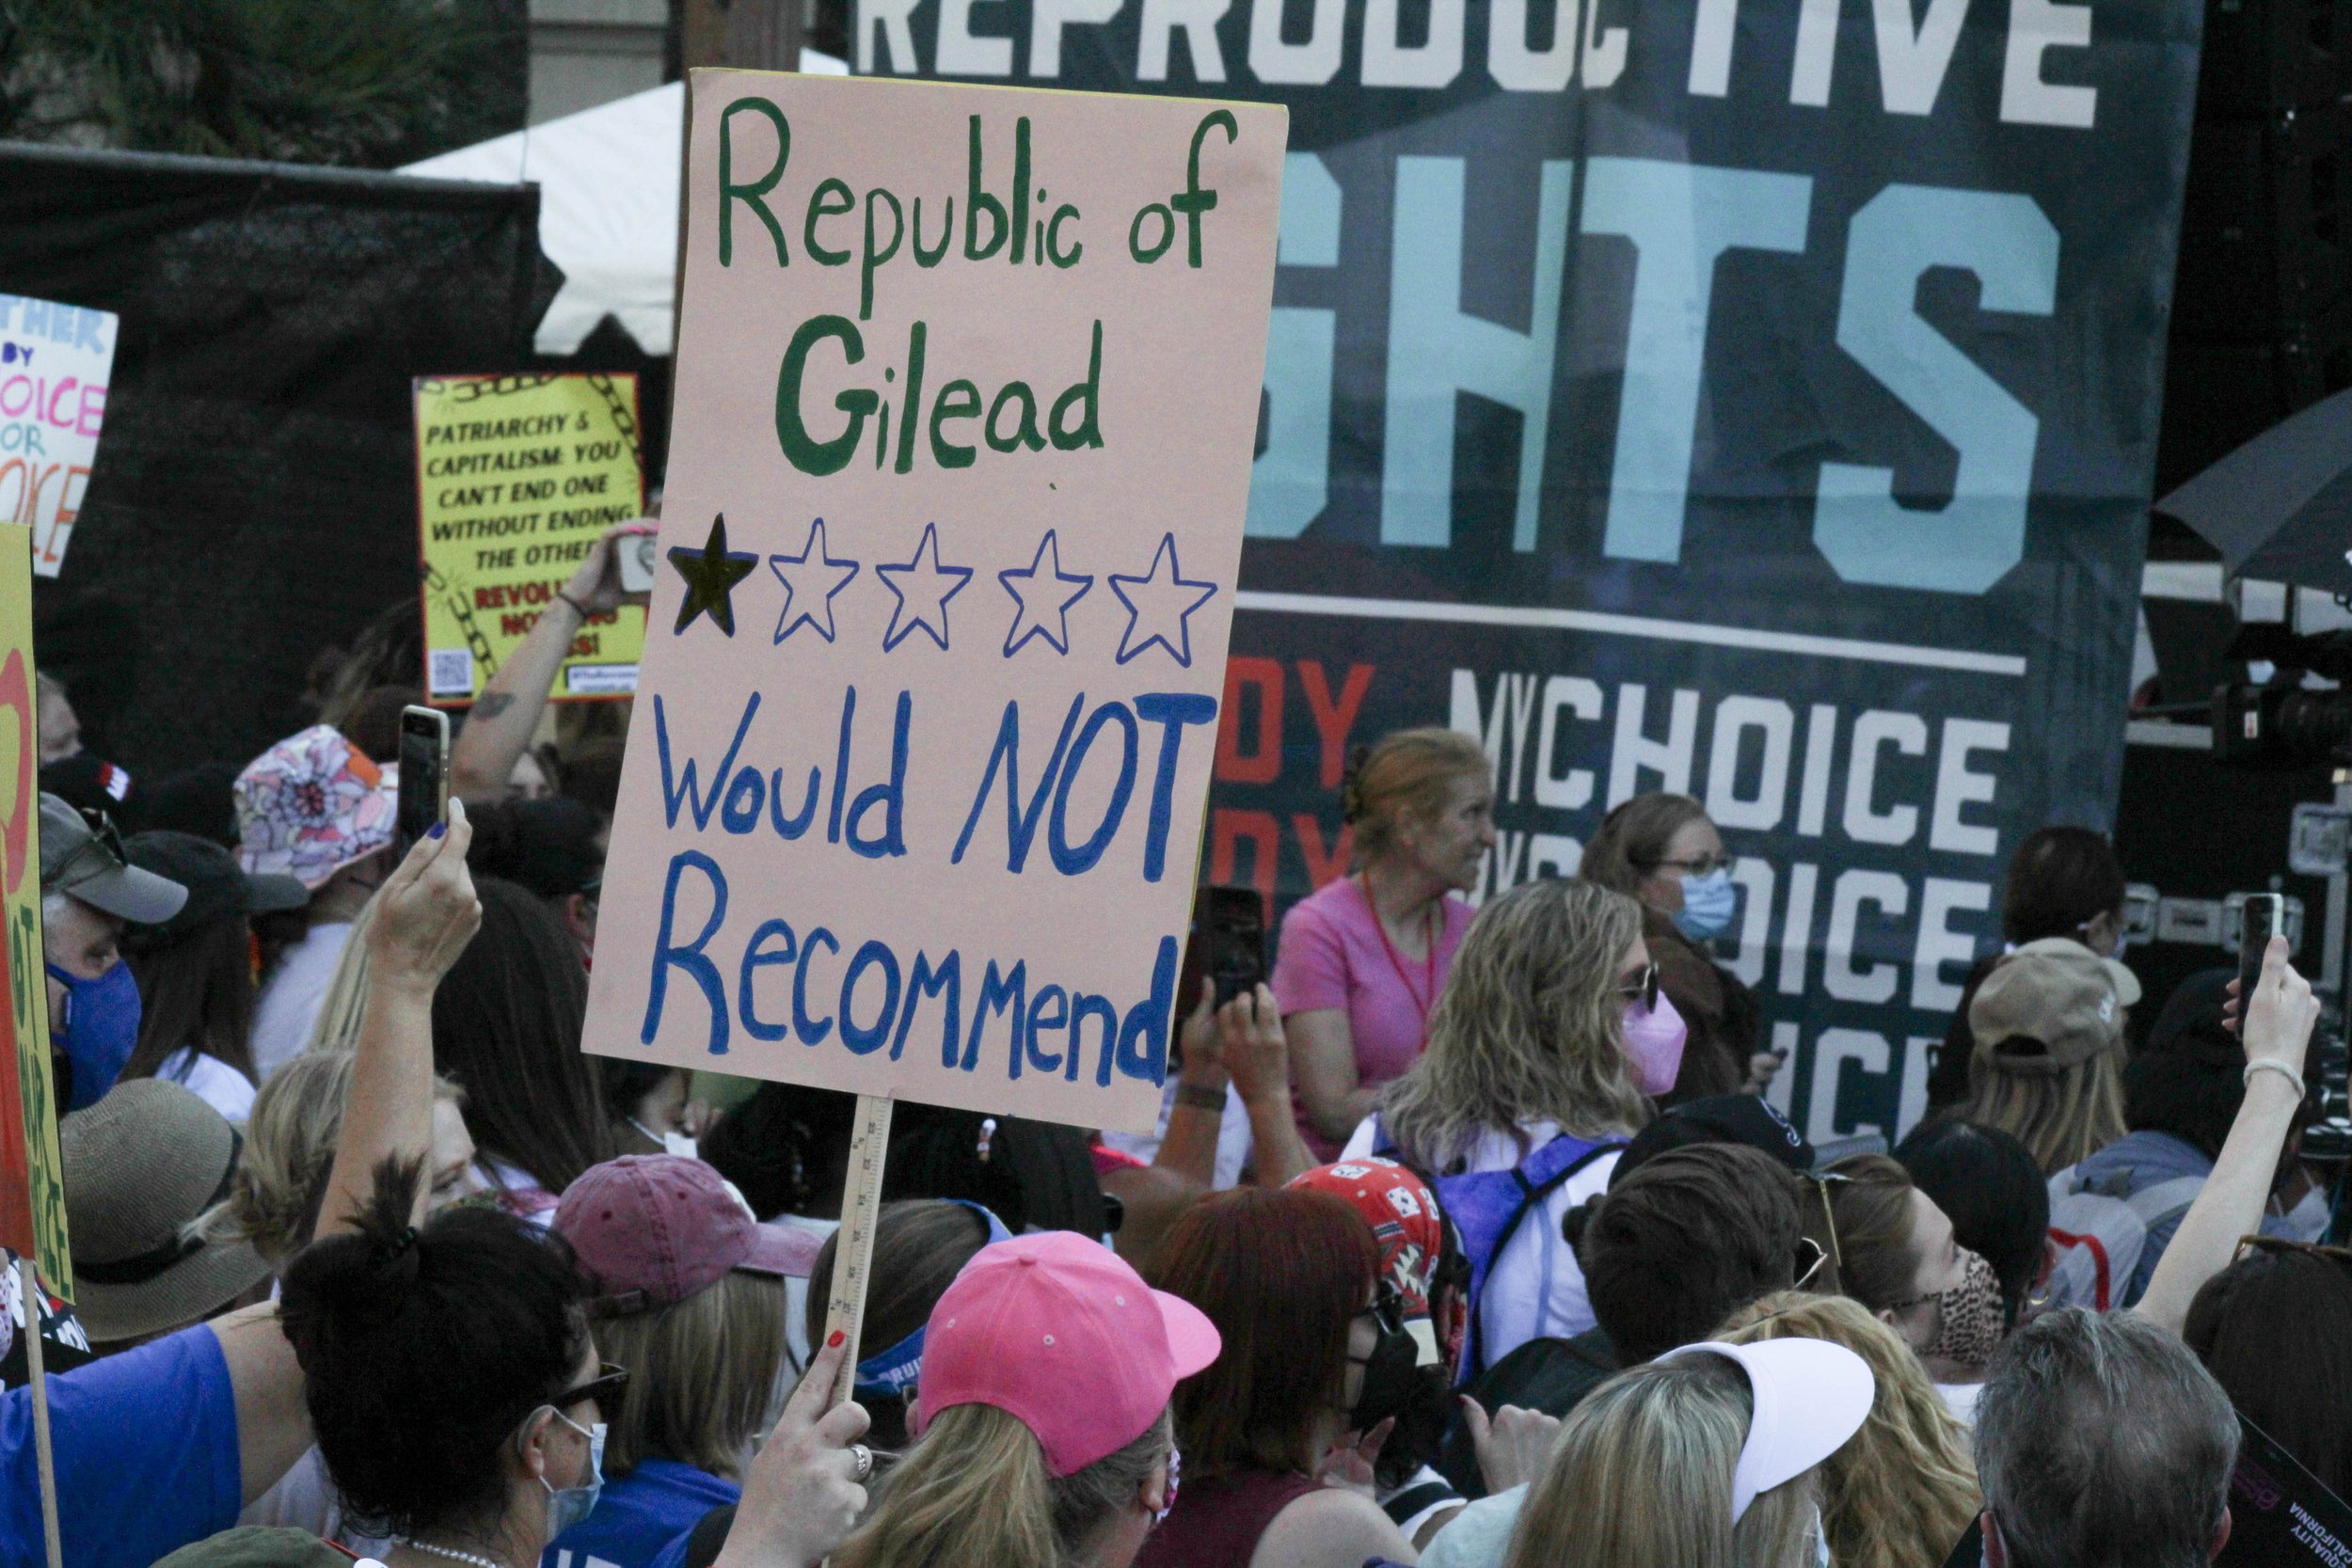  Protestor with sign reading "Republic of Gilead - would not recommend," stands among other protestors attending the Women's March in Downtown Los Angeles, CA. October 02, 2021. (Roxana Blacksea | The Corsair) 